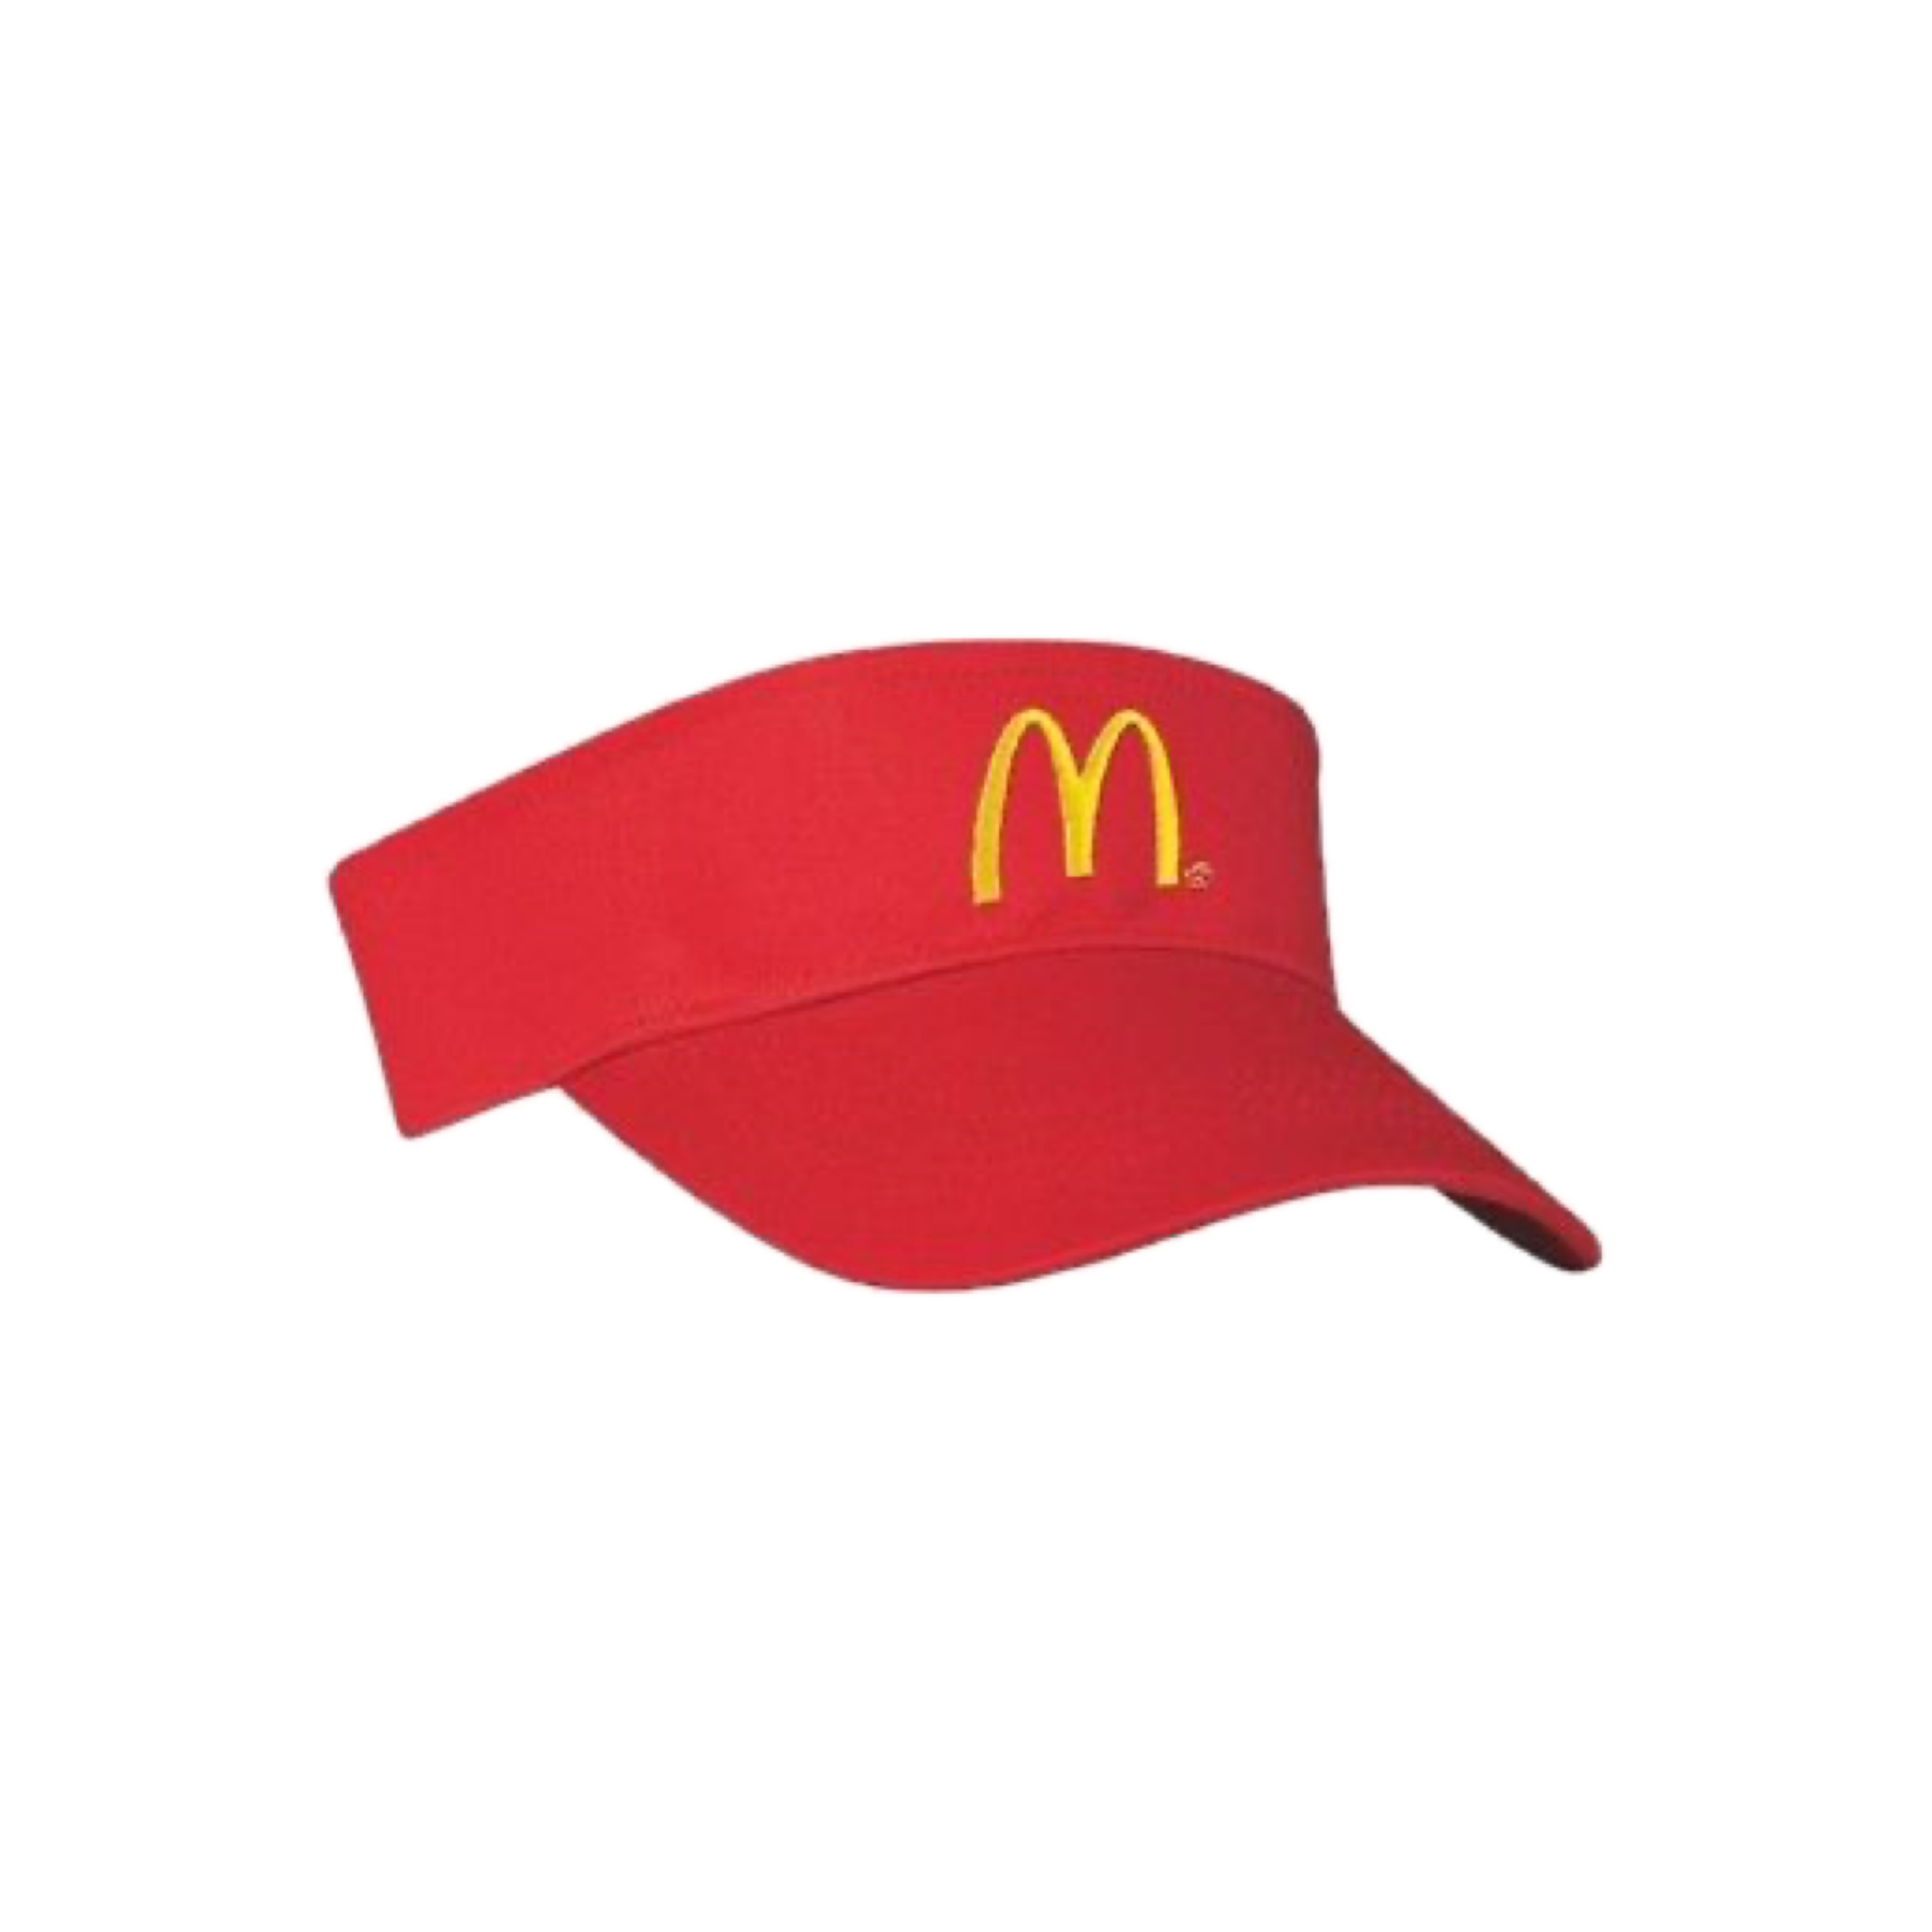 This visual is about mcdonalds hat freetoedit #mcdonalds #hat #freetoedit.